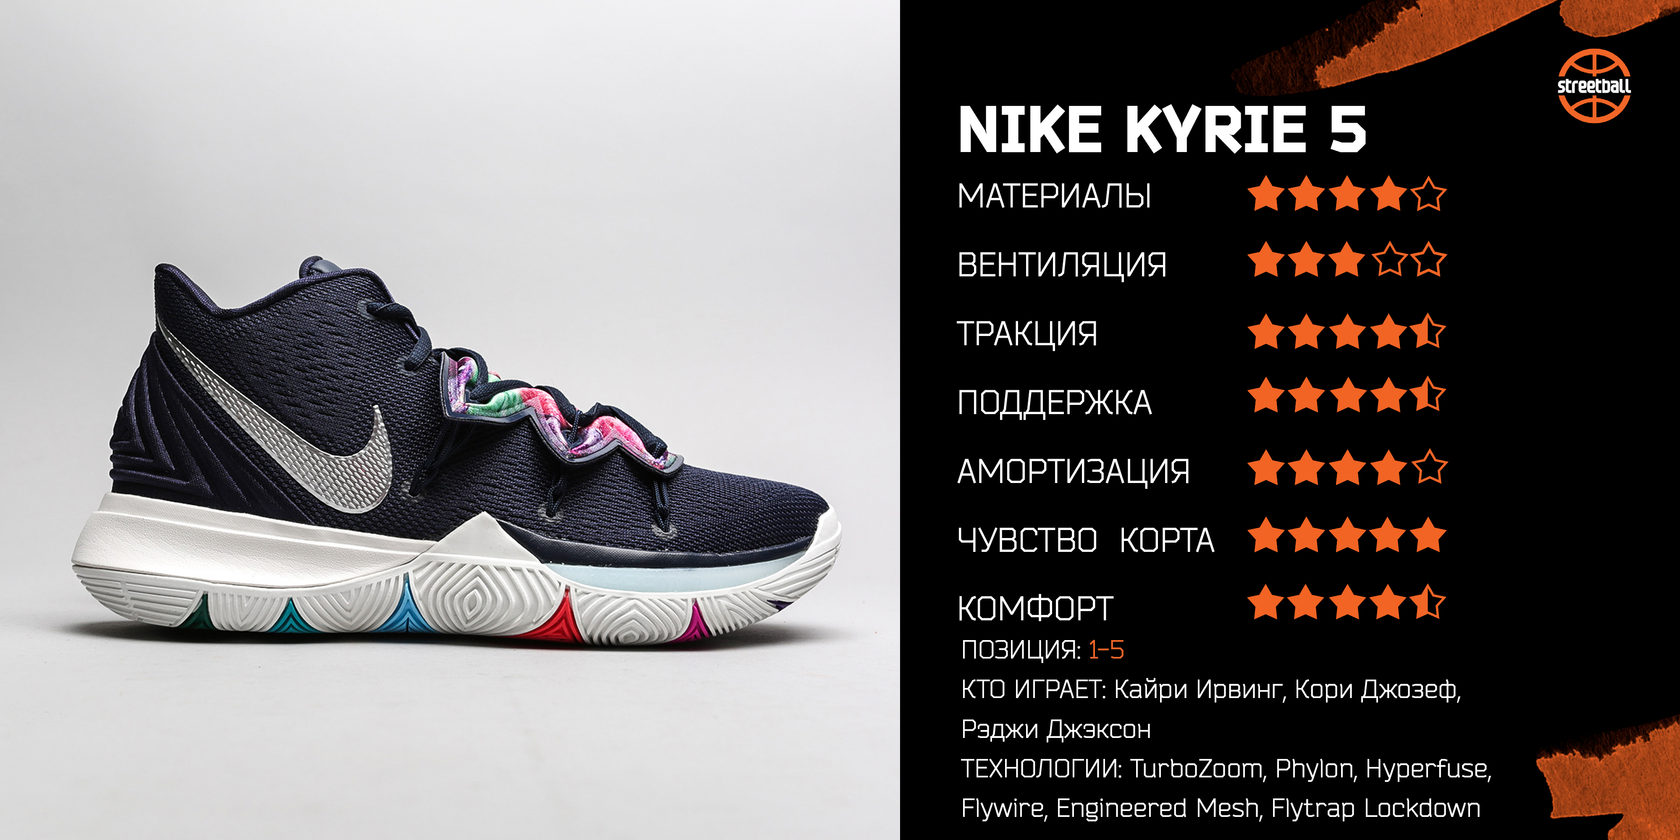 kyrie 5 what the